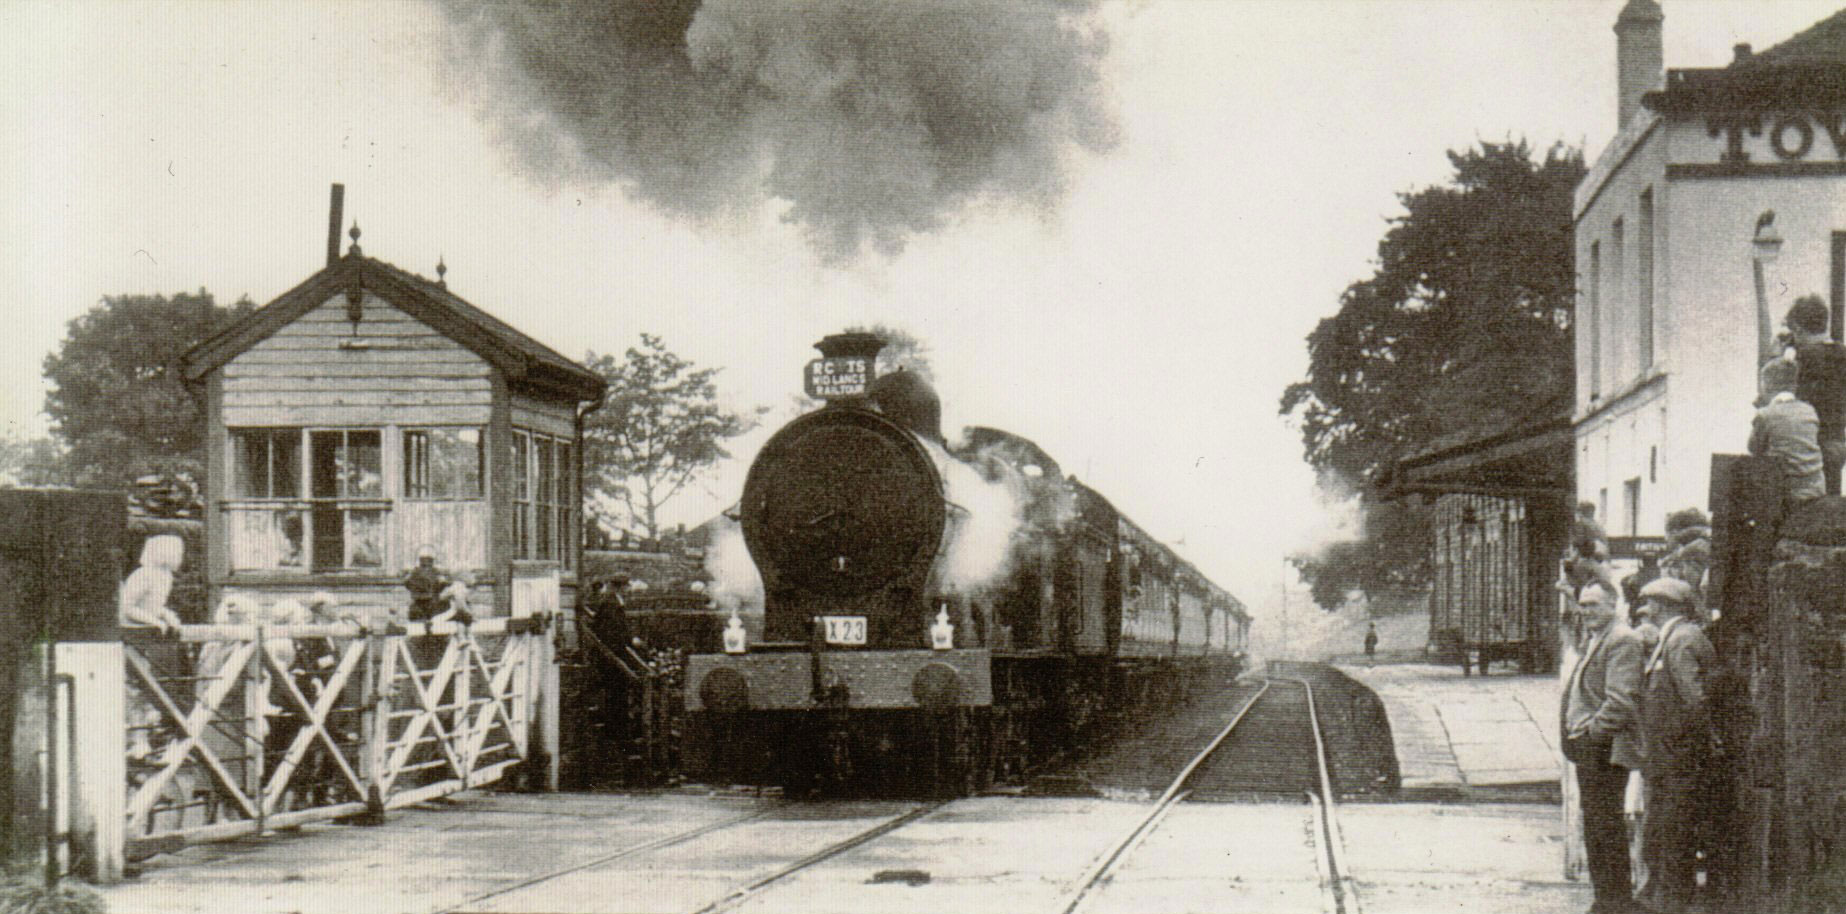 An old photograph of a steam train at the station